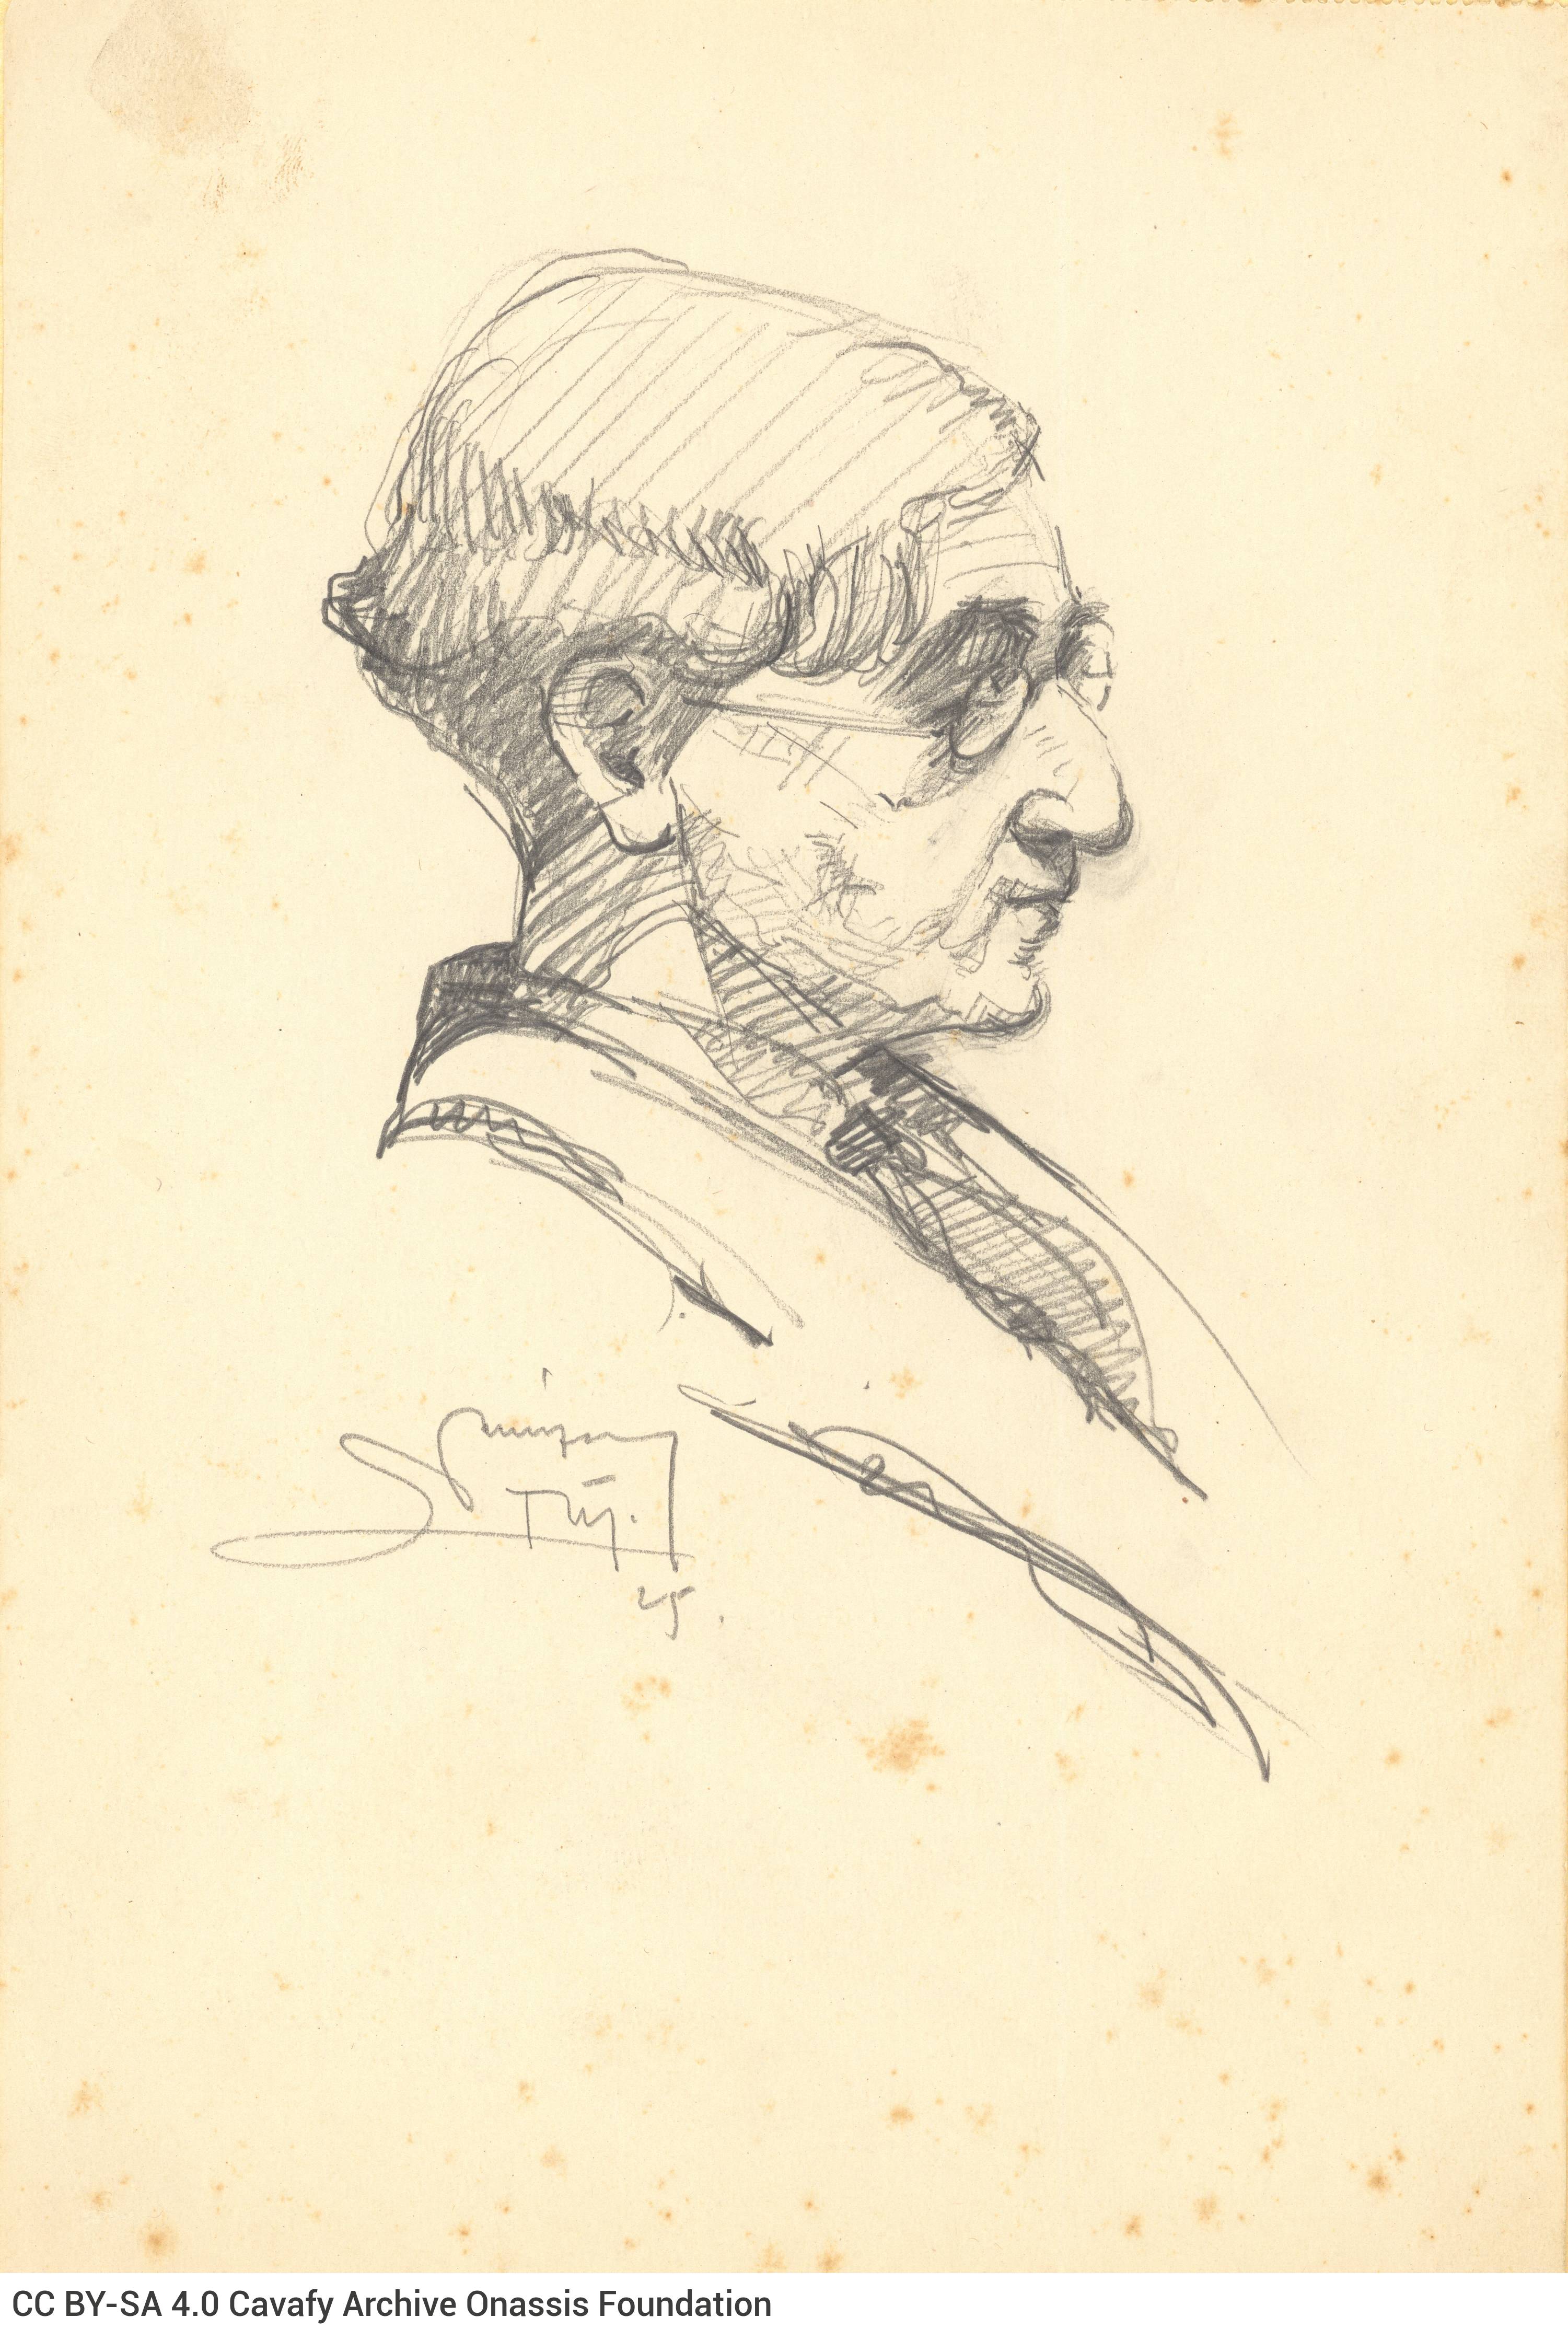 Sketch by Nikolaos Gogos in pencil on one side of a sheet. Blank verso. It depicts Cavafy in profile view, wearing glasses an